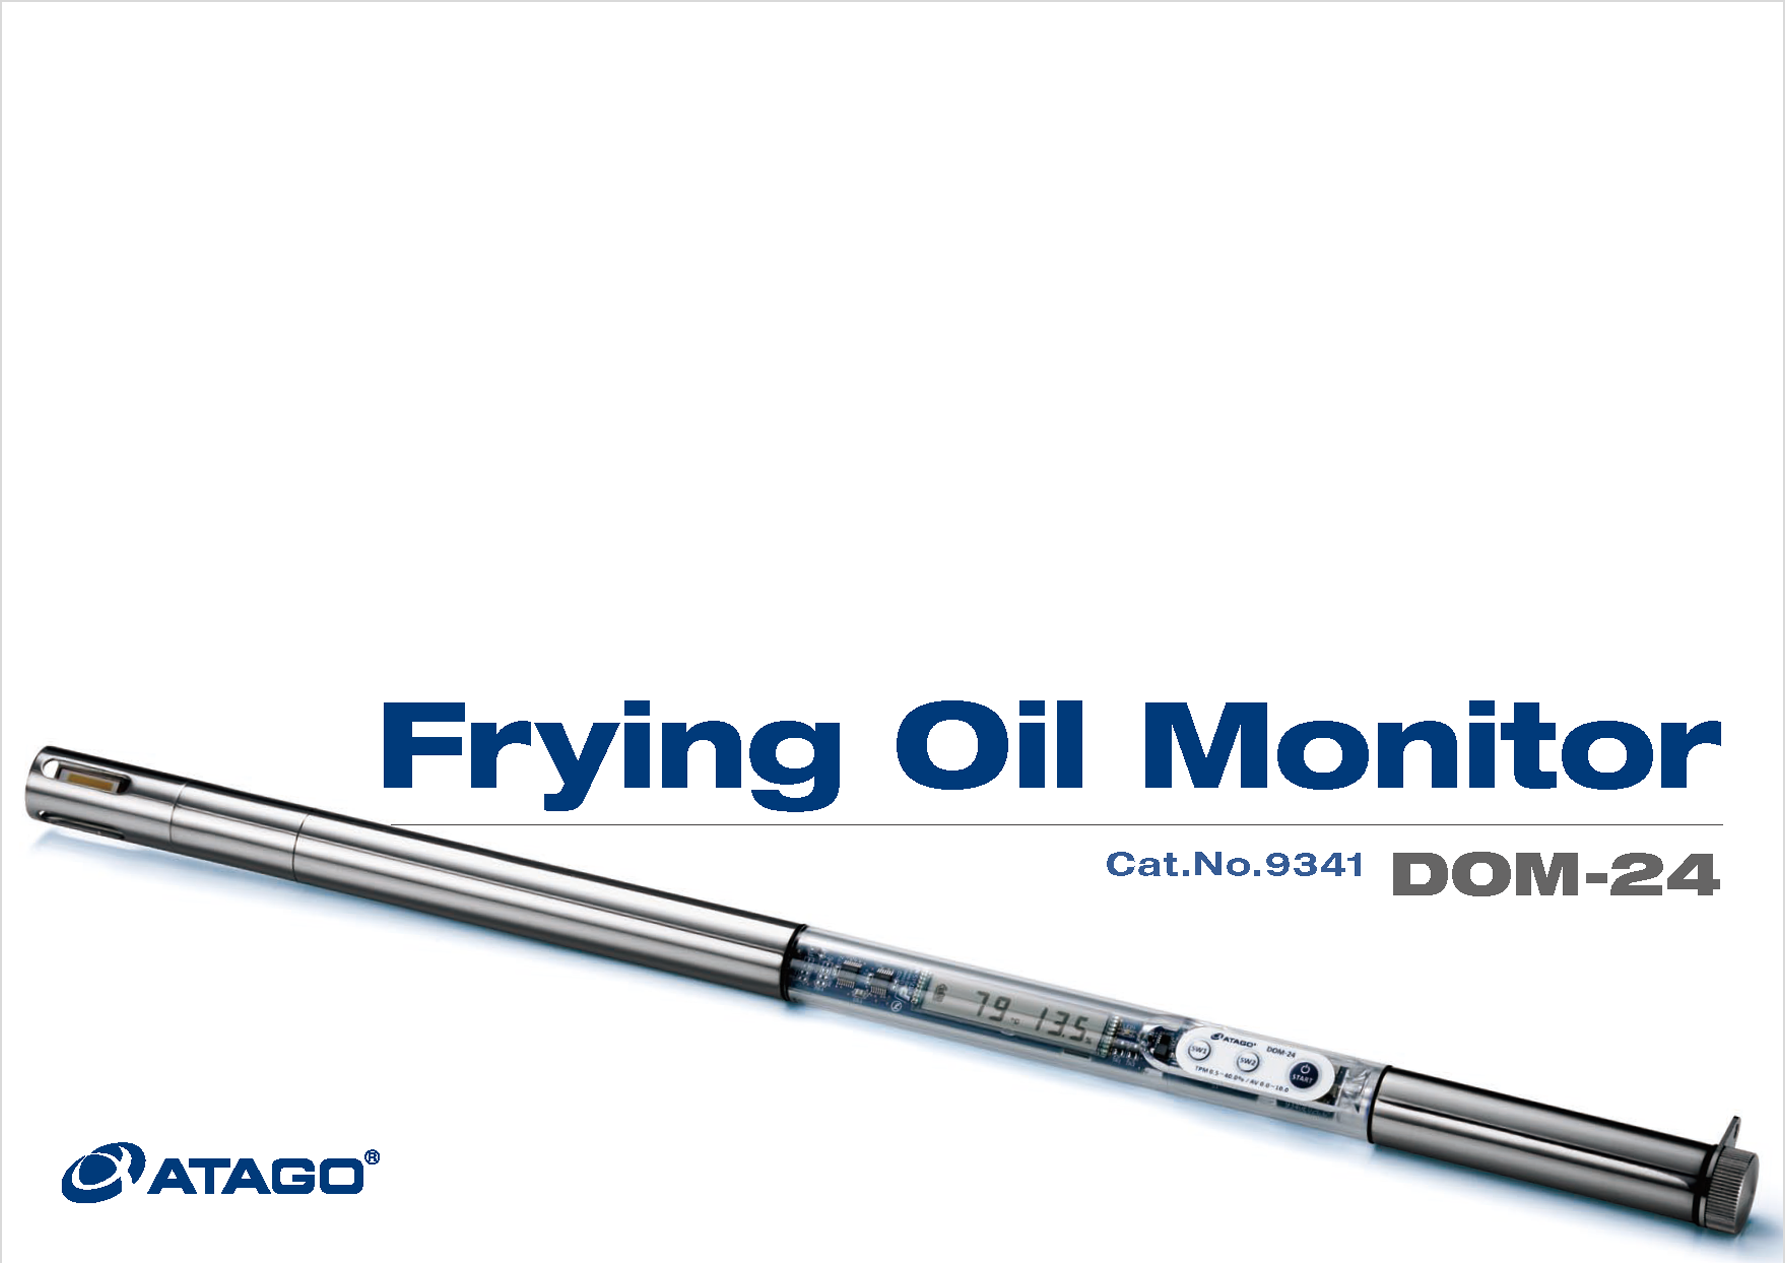 Frying Oil Monitor DOM-24